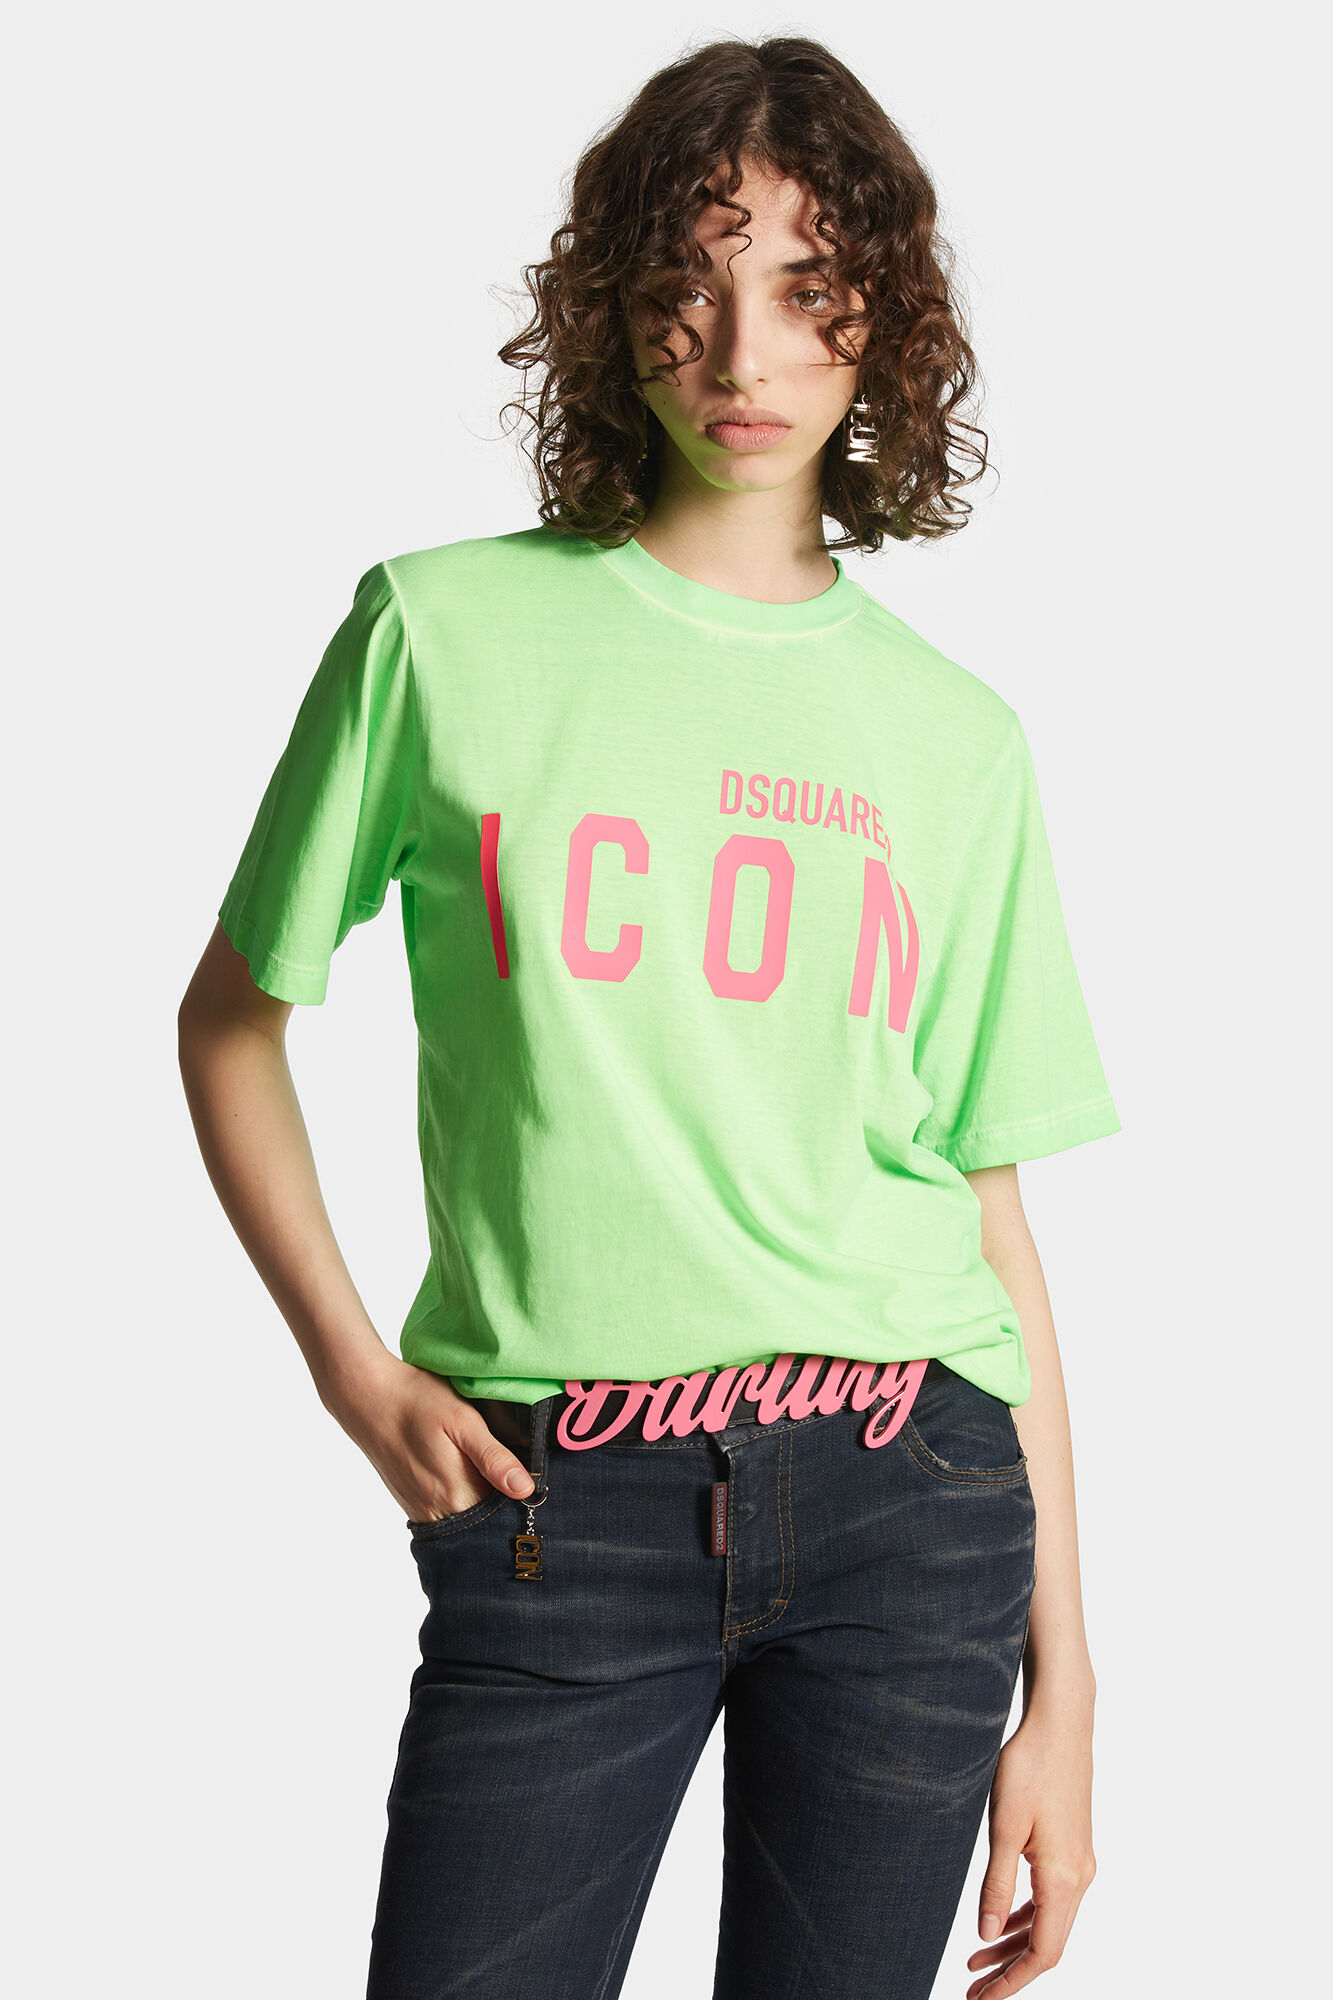 Icon Tops & T-Shirts | DSQUARED2.